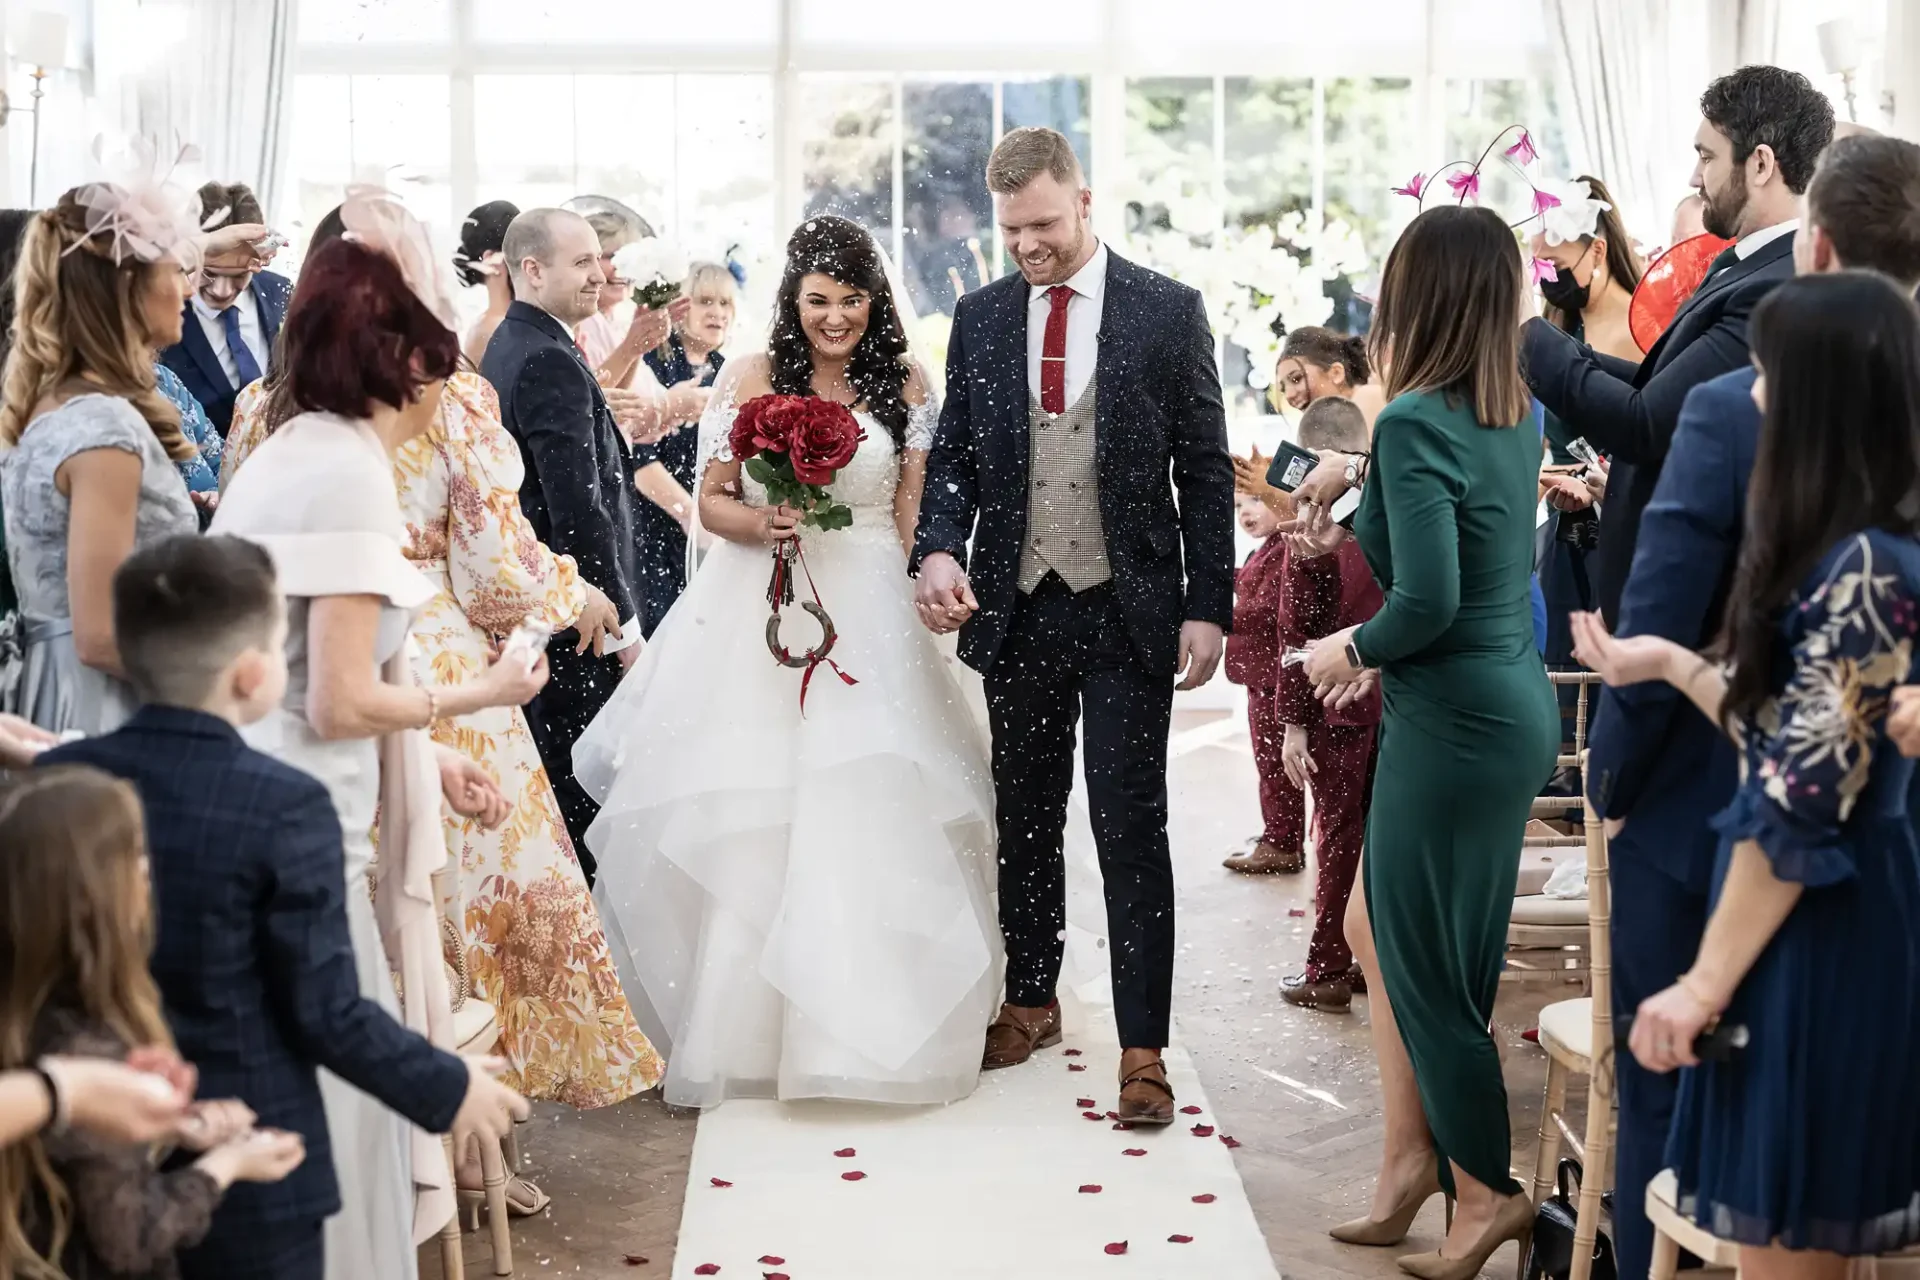 Bride and groom walking down the aisle, smiling as guests throw confetti during a wedding ceremony in a bright venue.